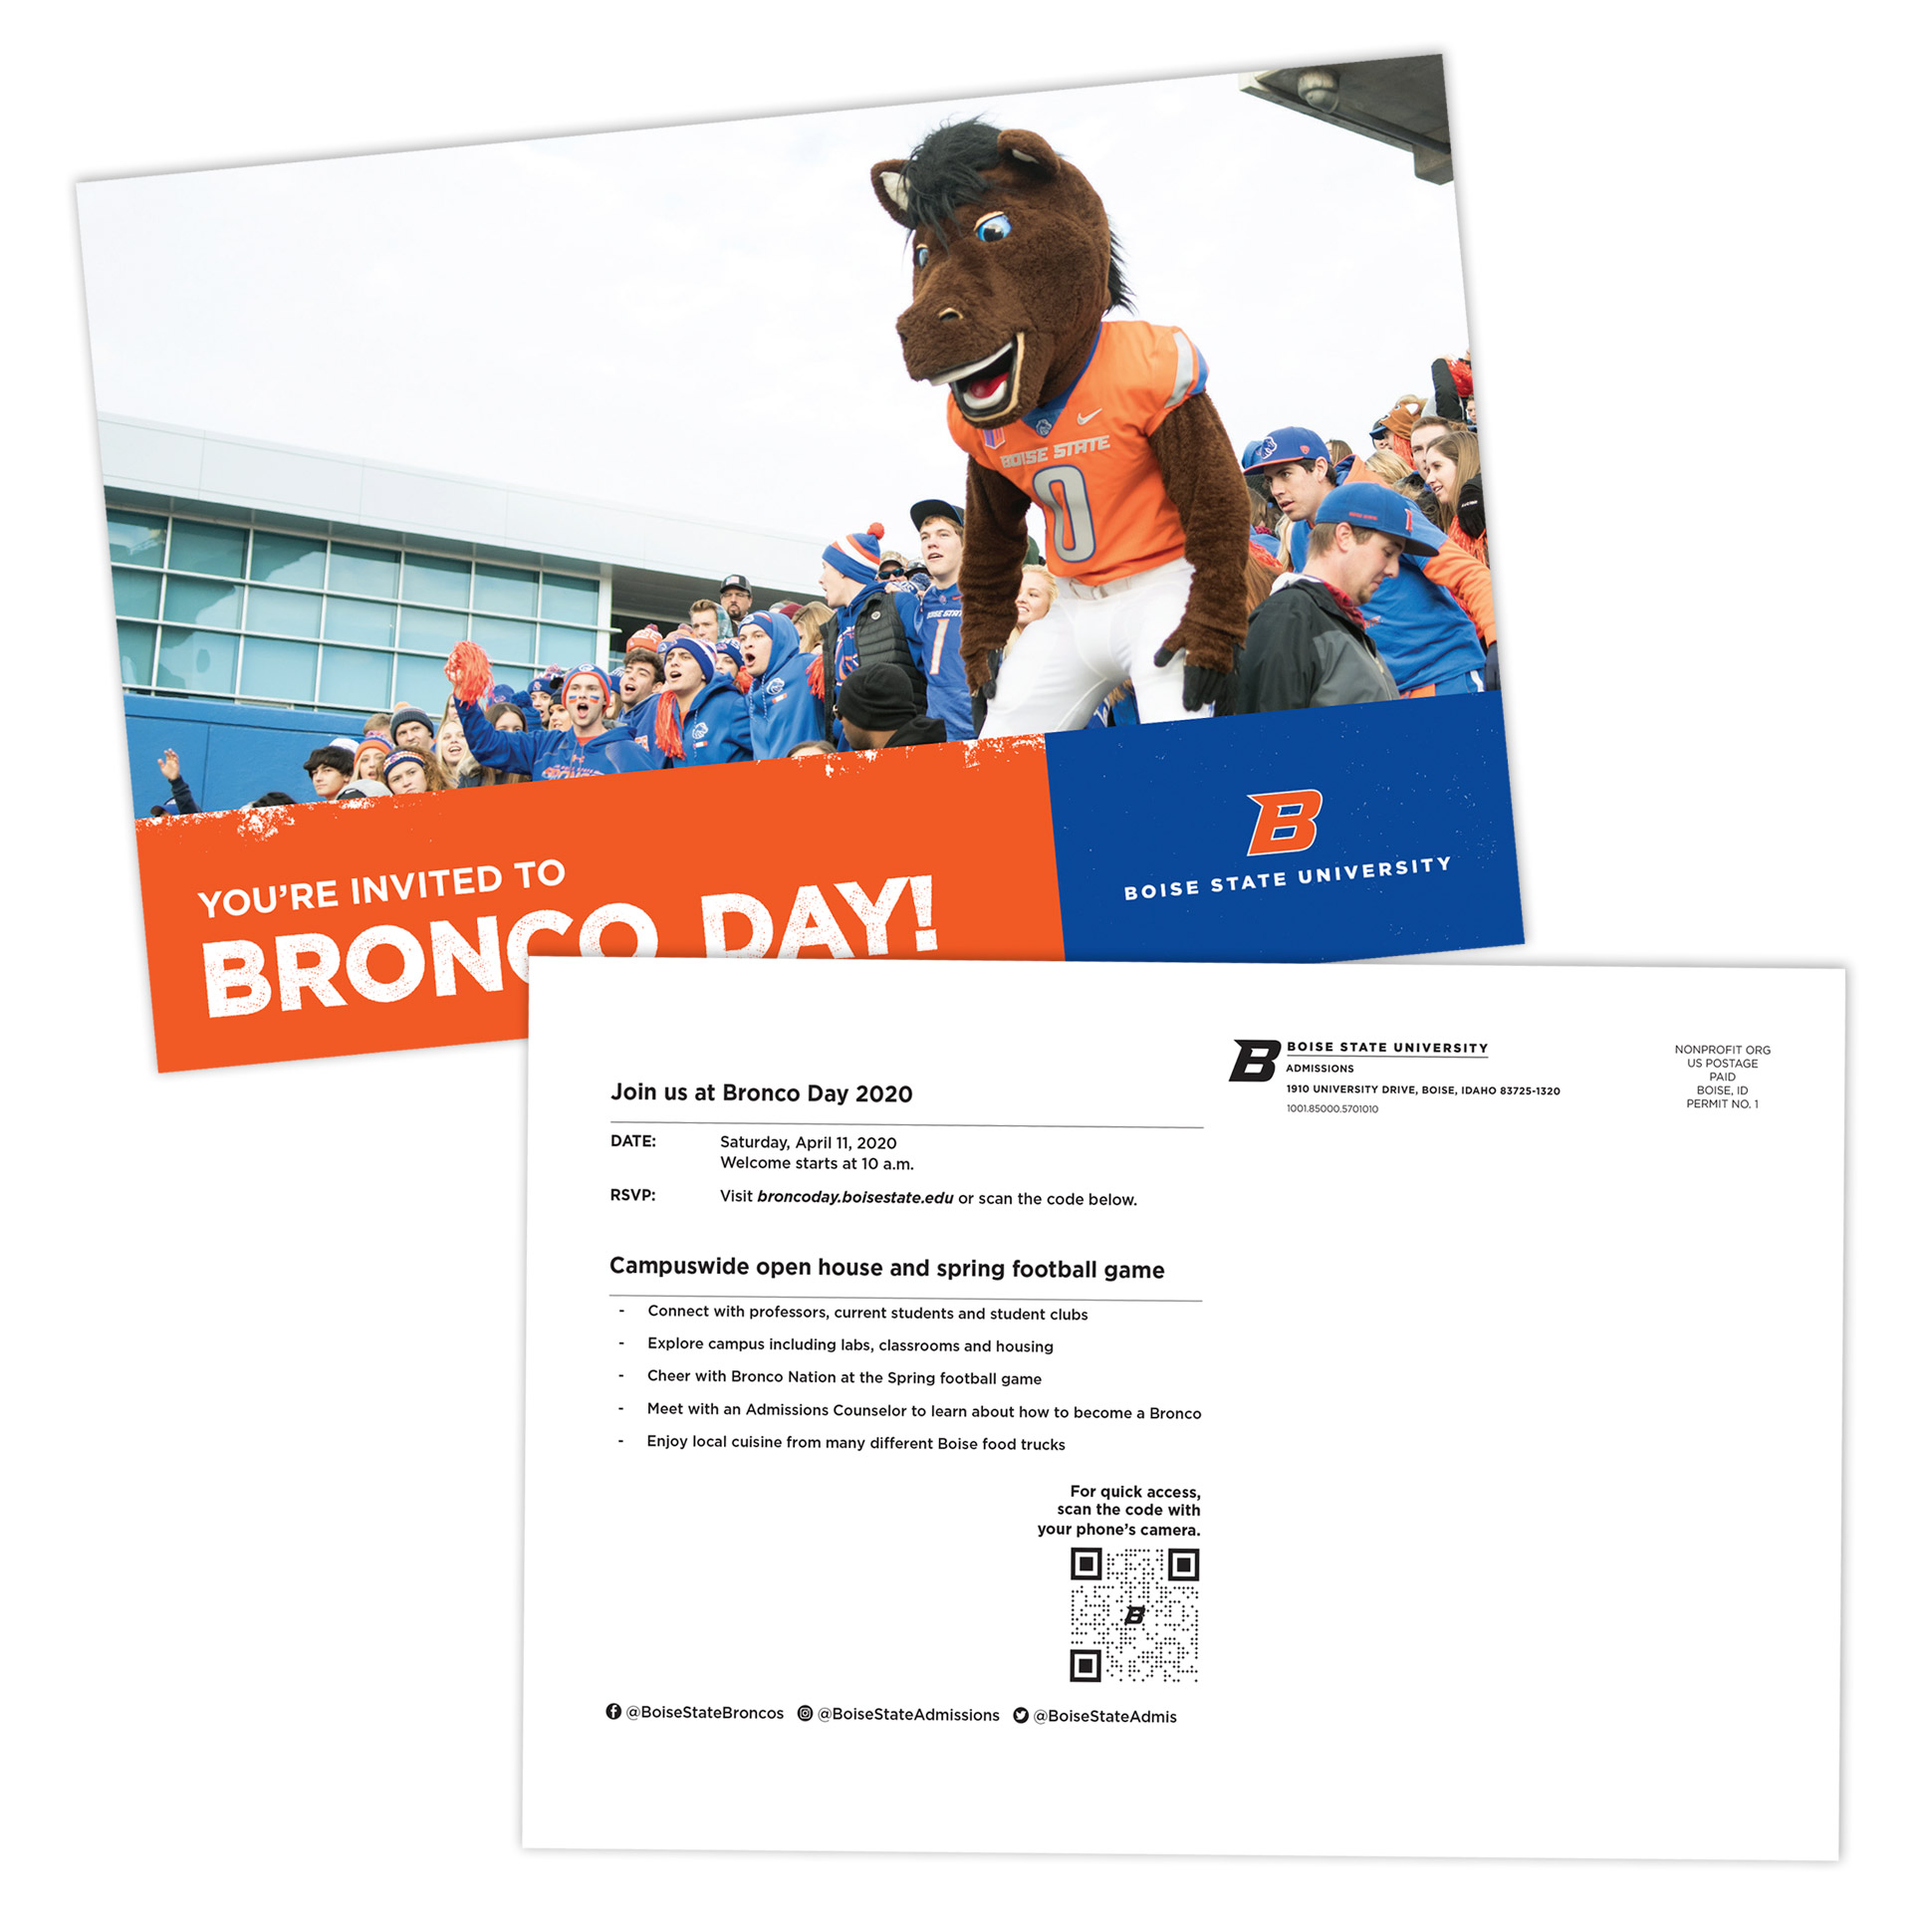 Bronco Day postcard front and back showing an example of a QR code.